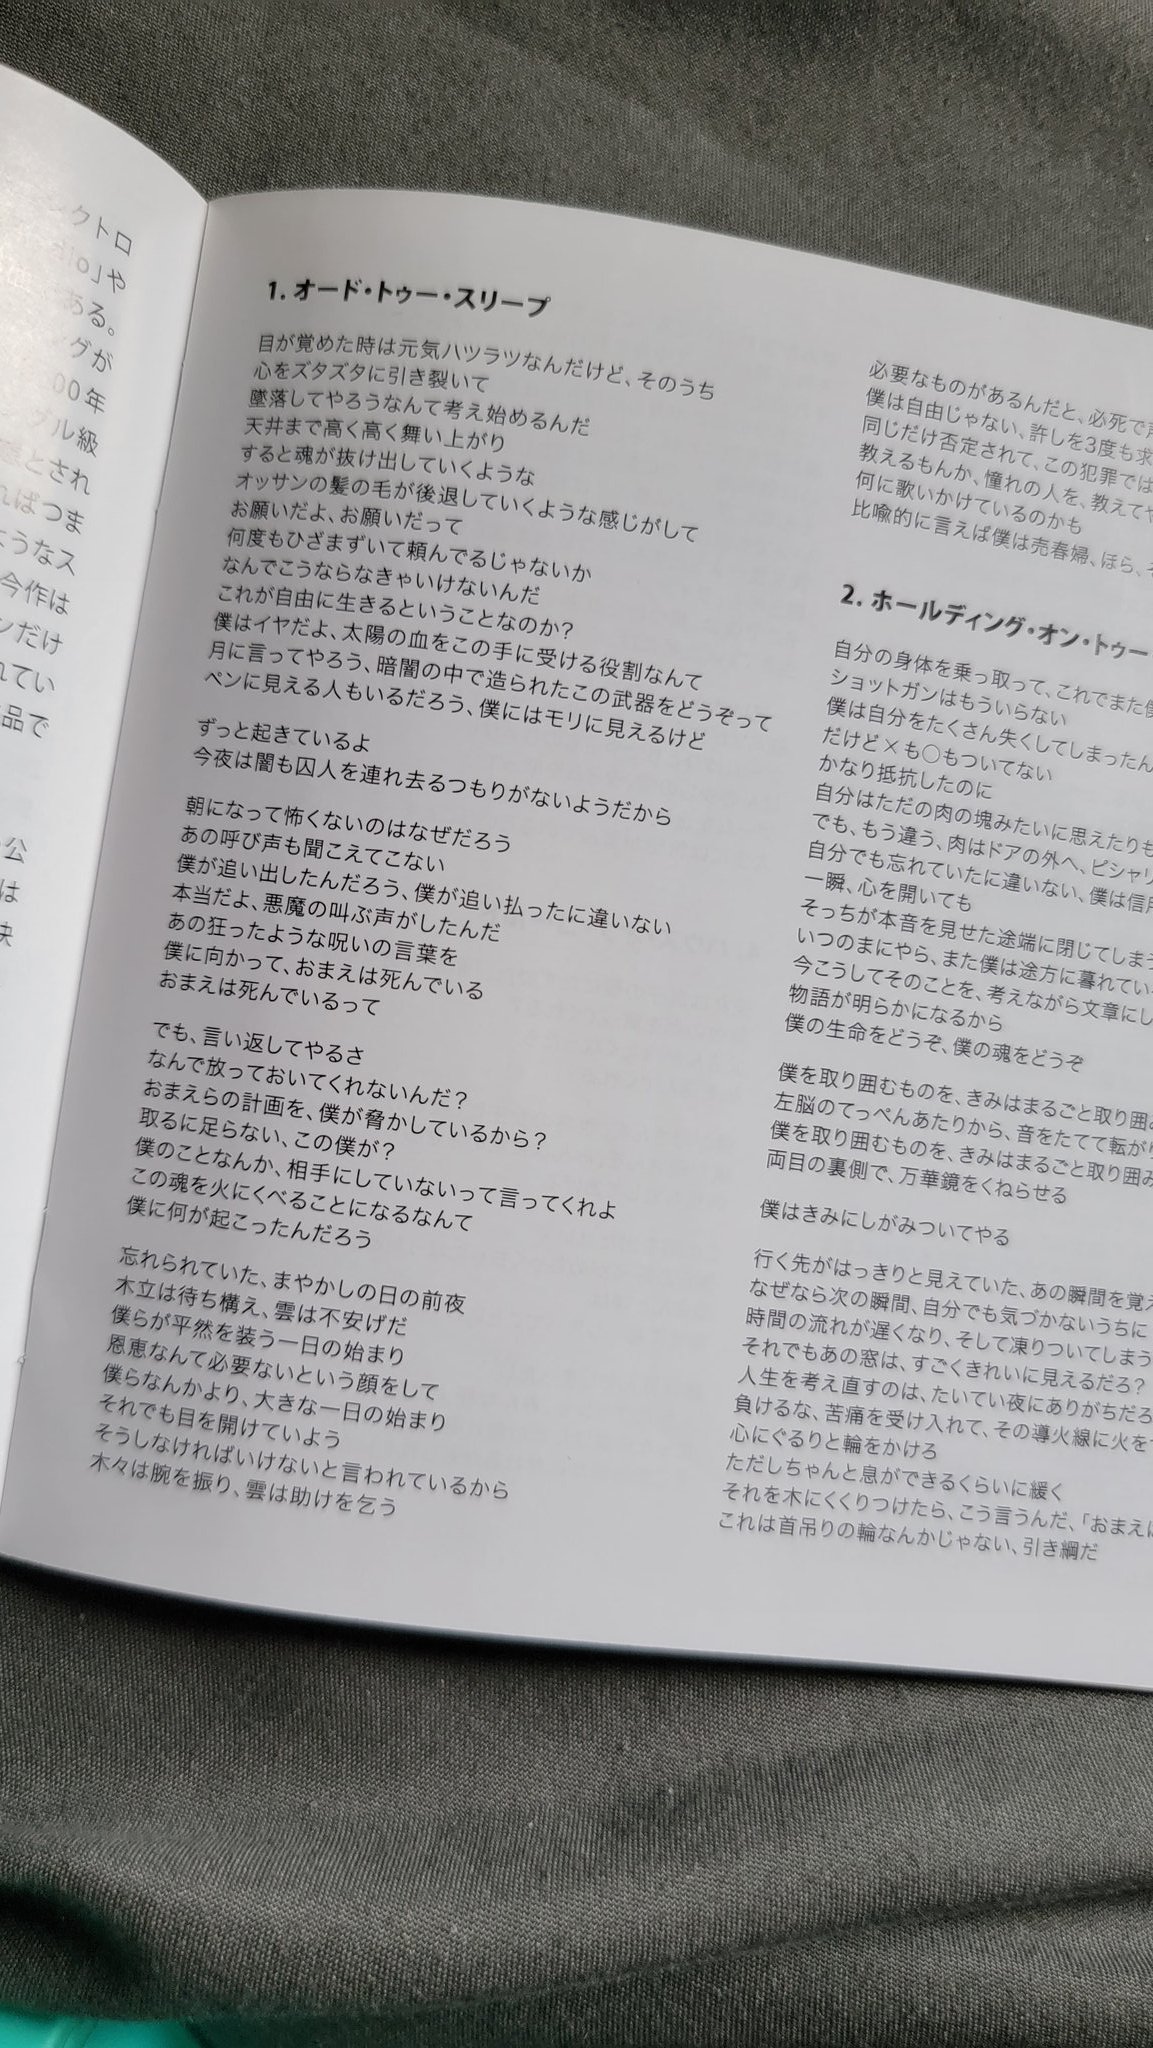 Archived Pilots And Now For Your Enjoyment Vessel Lyrics Translated From English To Japanese And Then Back To English Using The Magic Of Google Lens T Co Cuf2oj0z0x Twitter